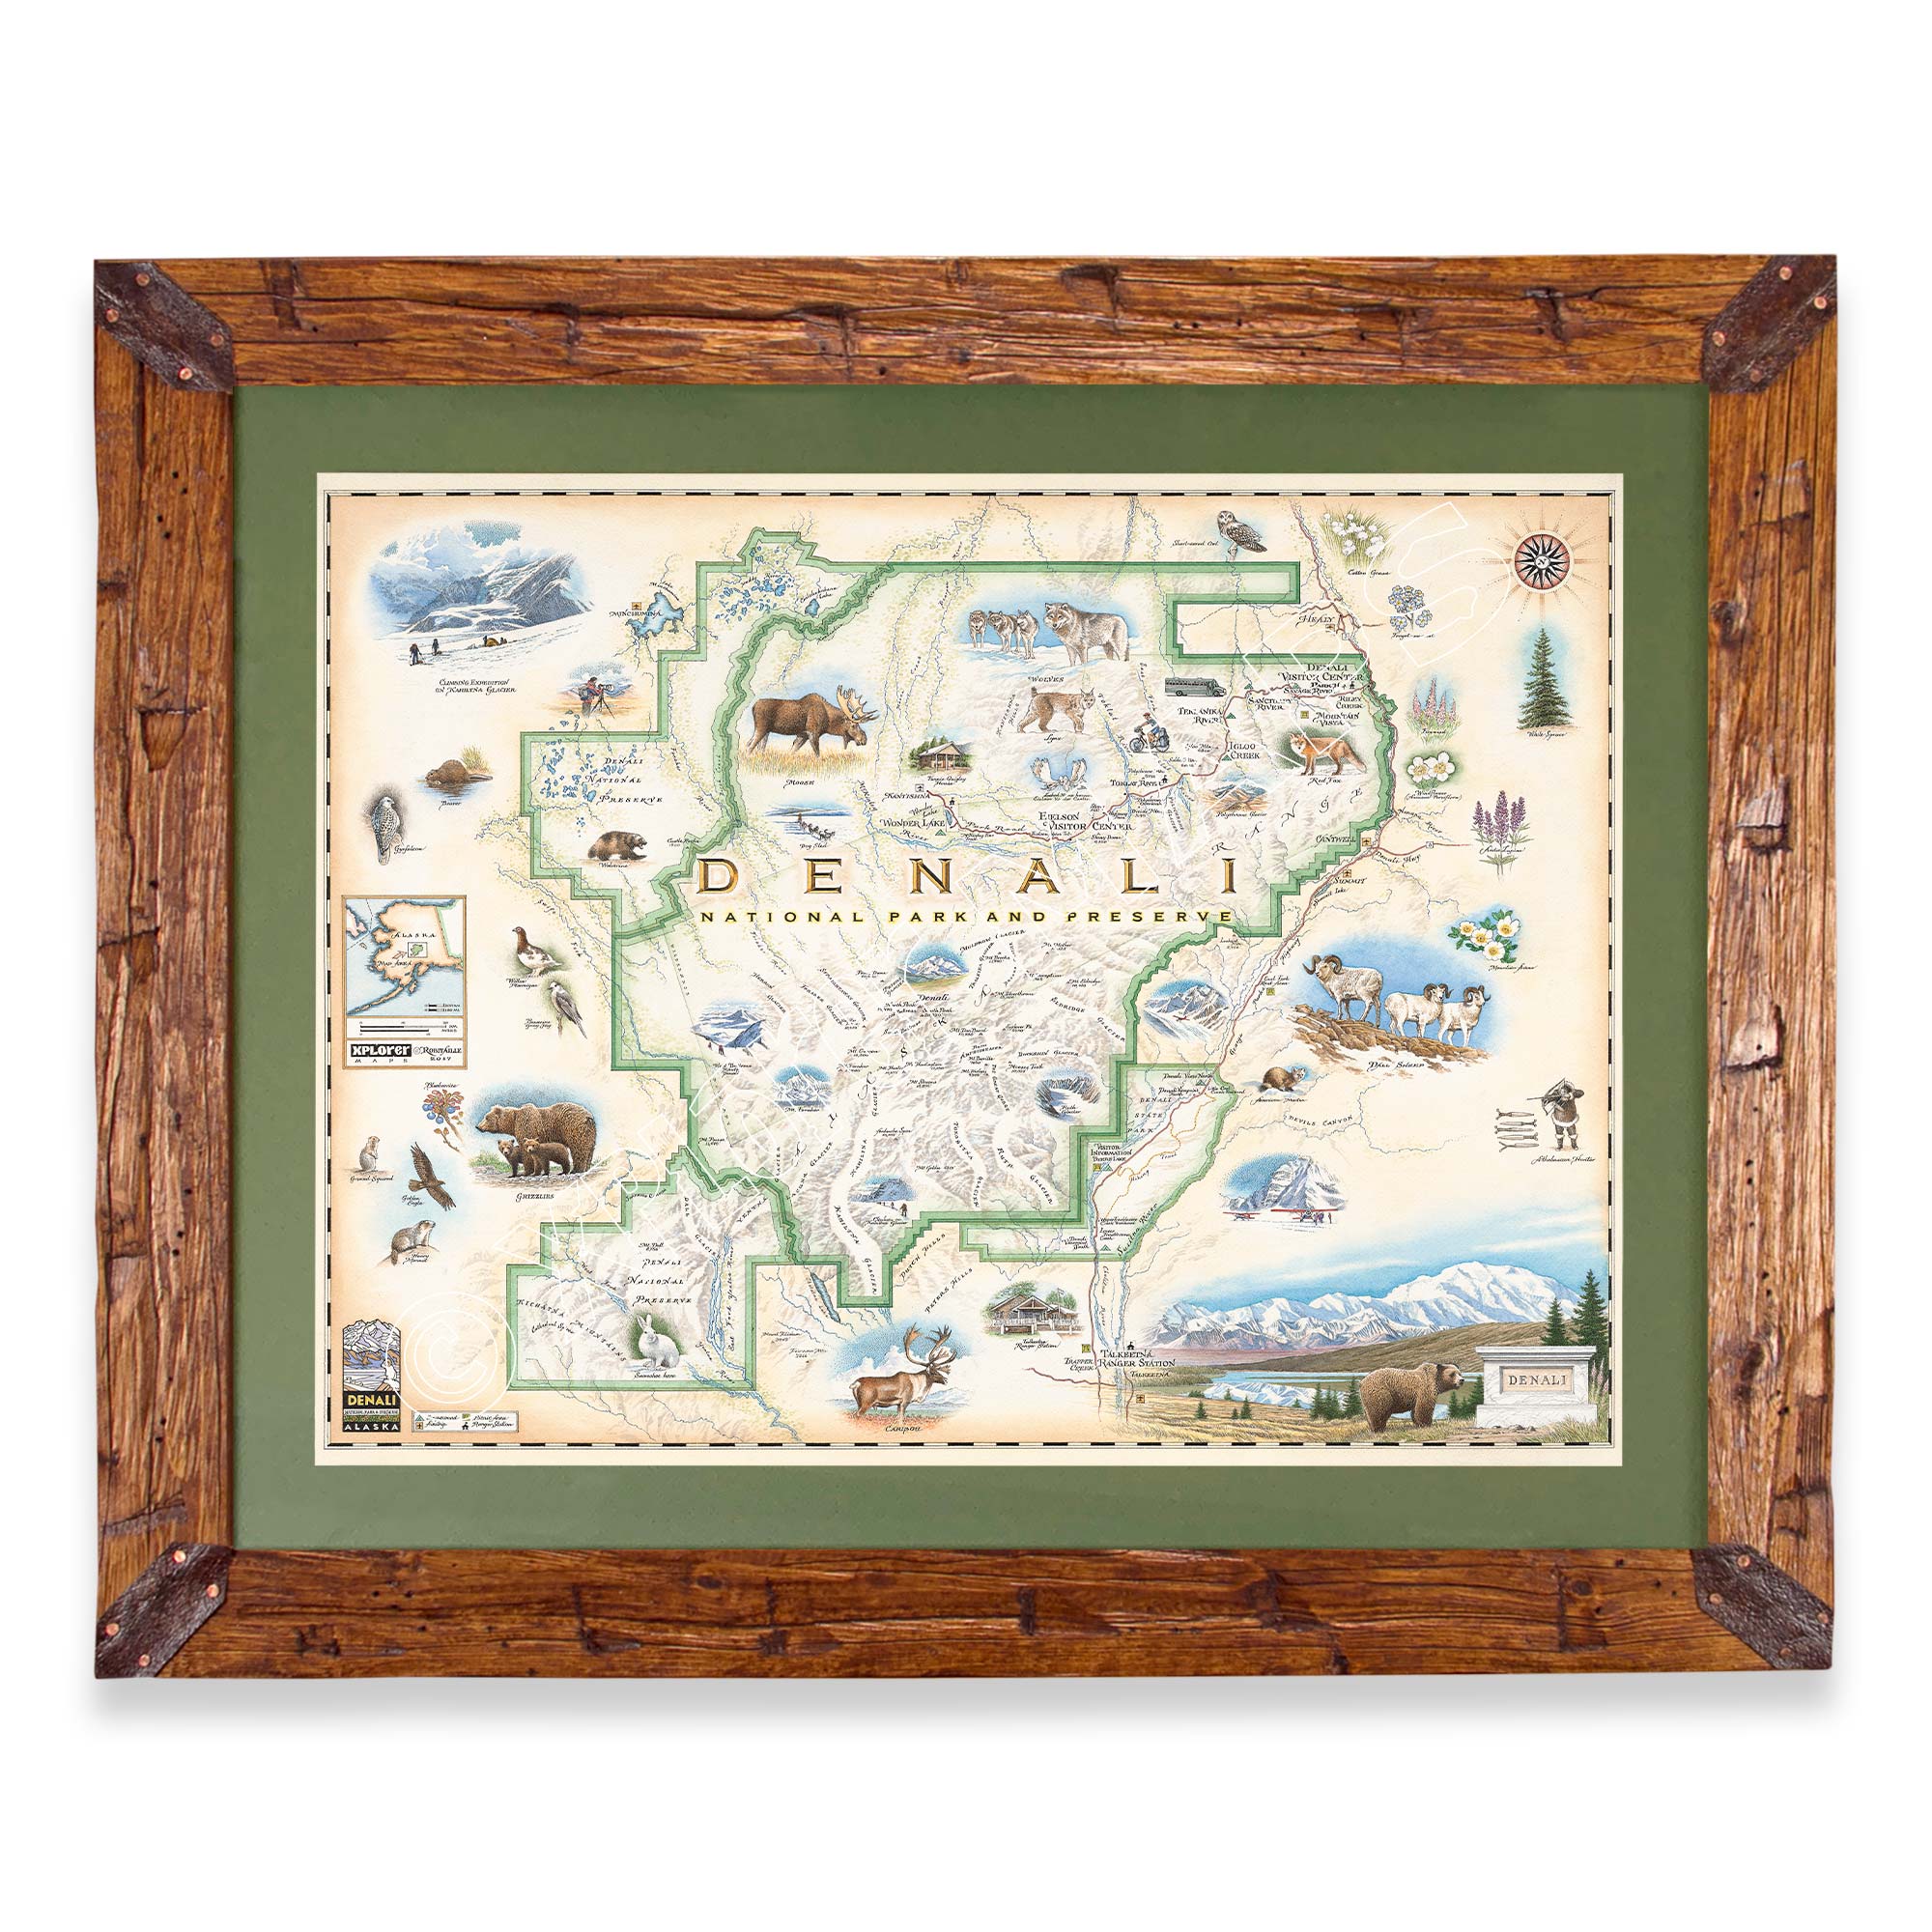 Denali National Park hand-drawn map in a Montana hand-scraped pine wood frame with green mat.